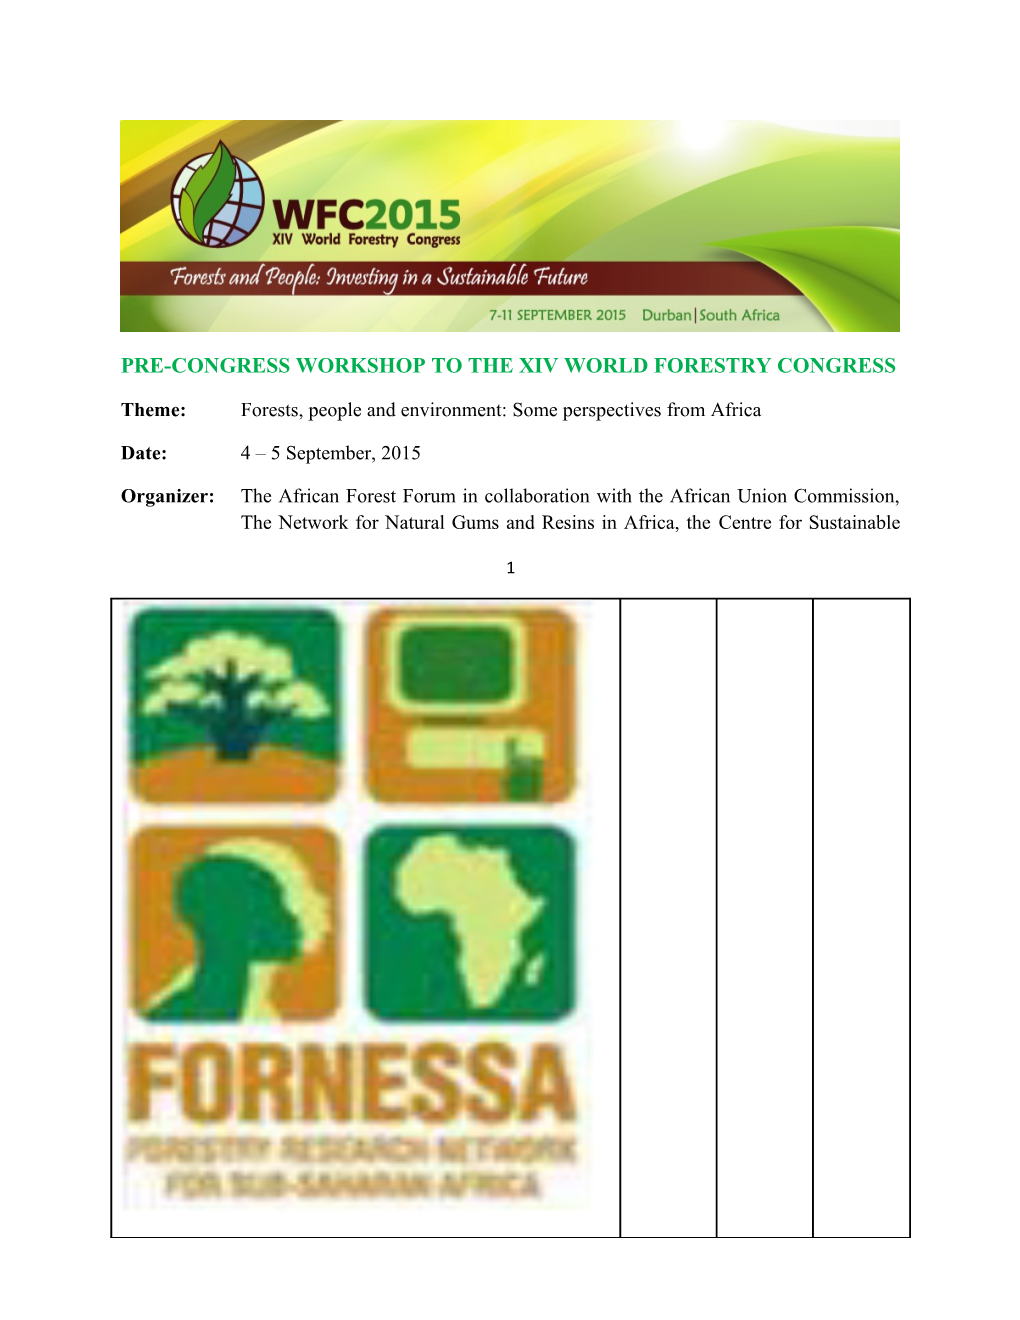 Pre-Congress Workshop to the Xiv World Forestry Congress